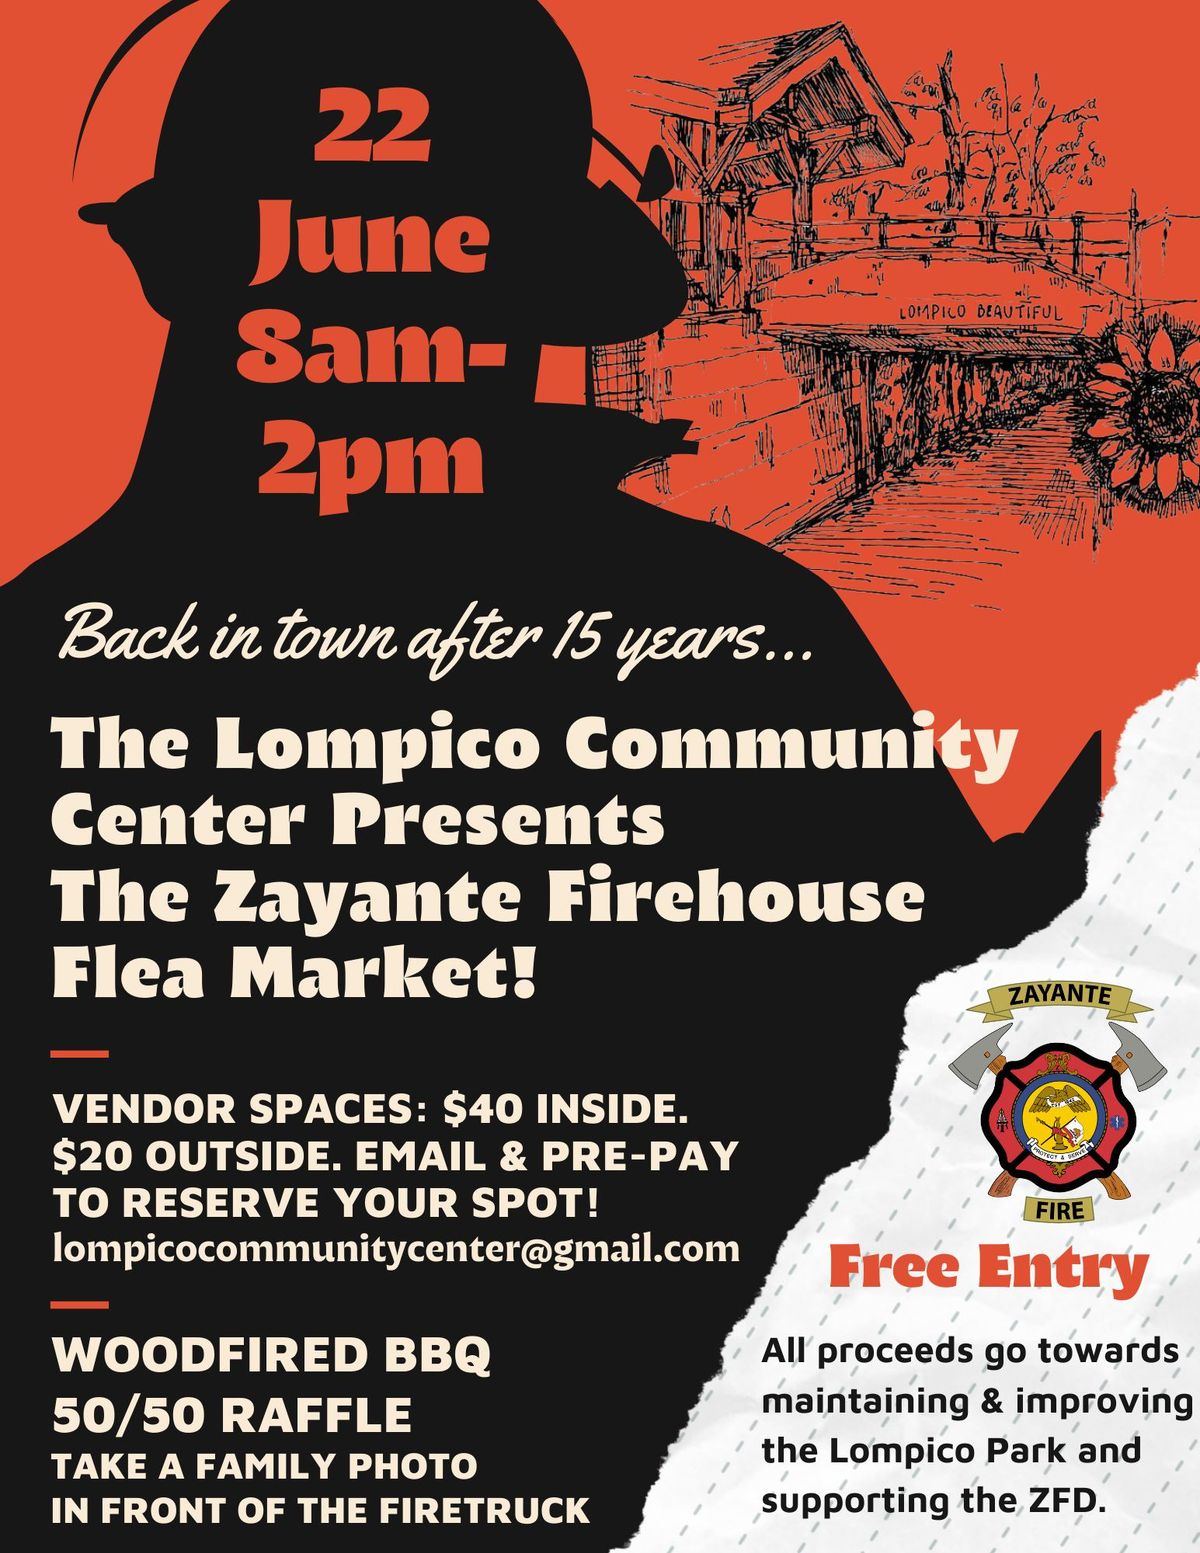 Zayante Firehouse Flea Market - Hosted by the LCC